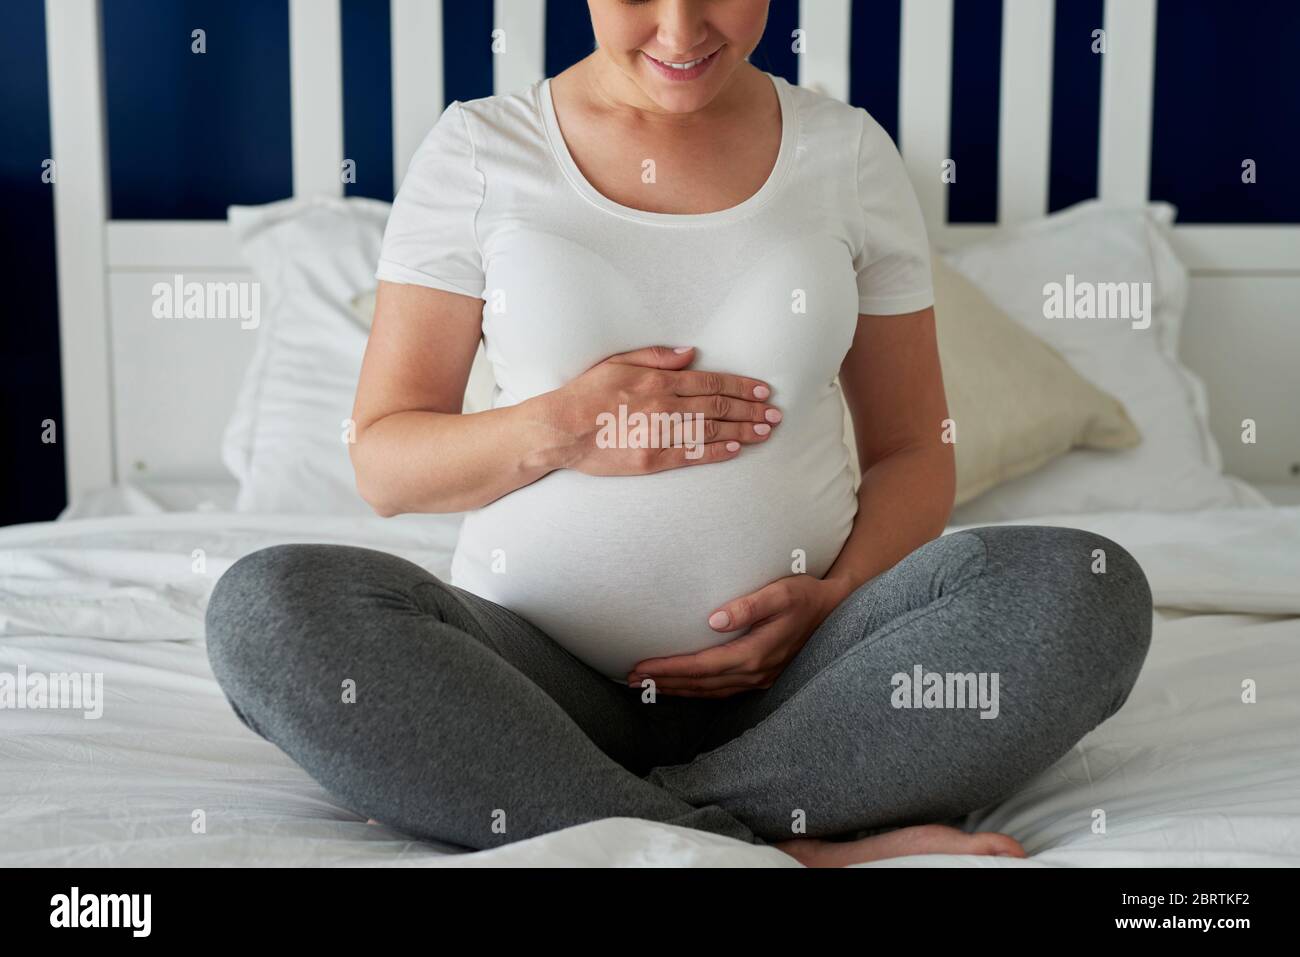 Pregnant woman sitting on bed and keeping hands on stomach Stock Photo